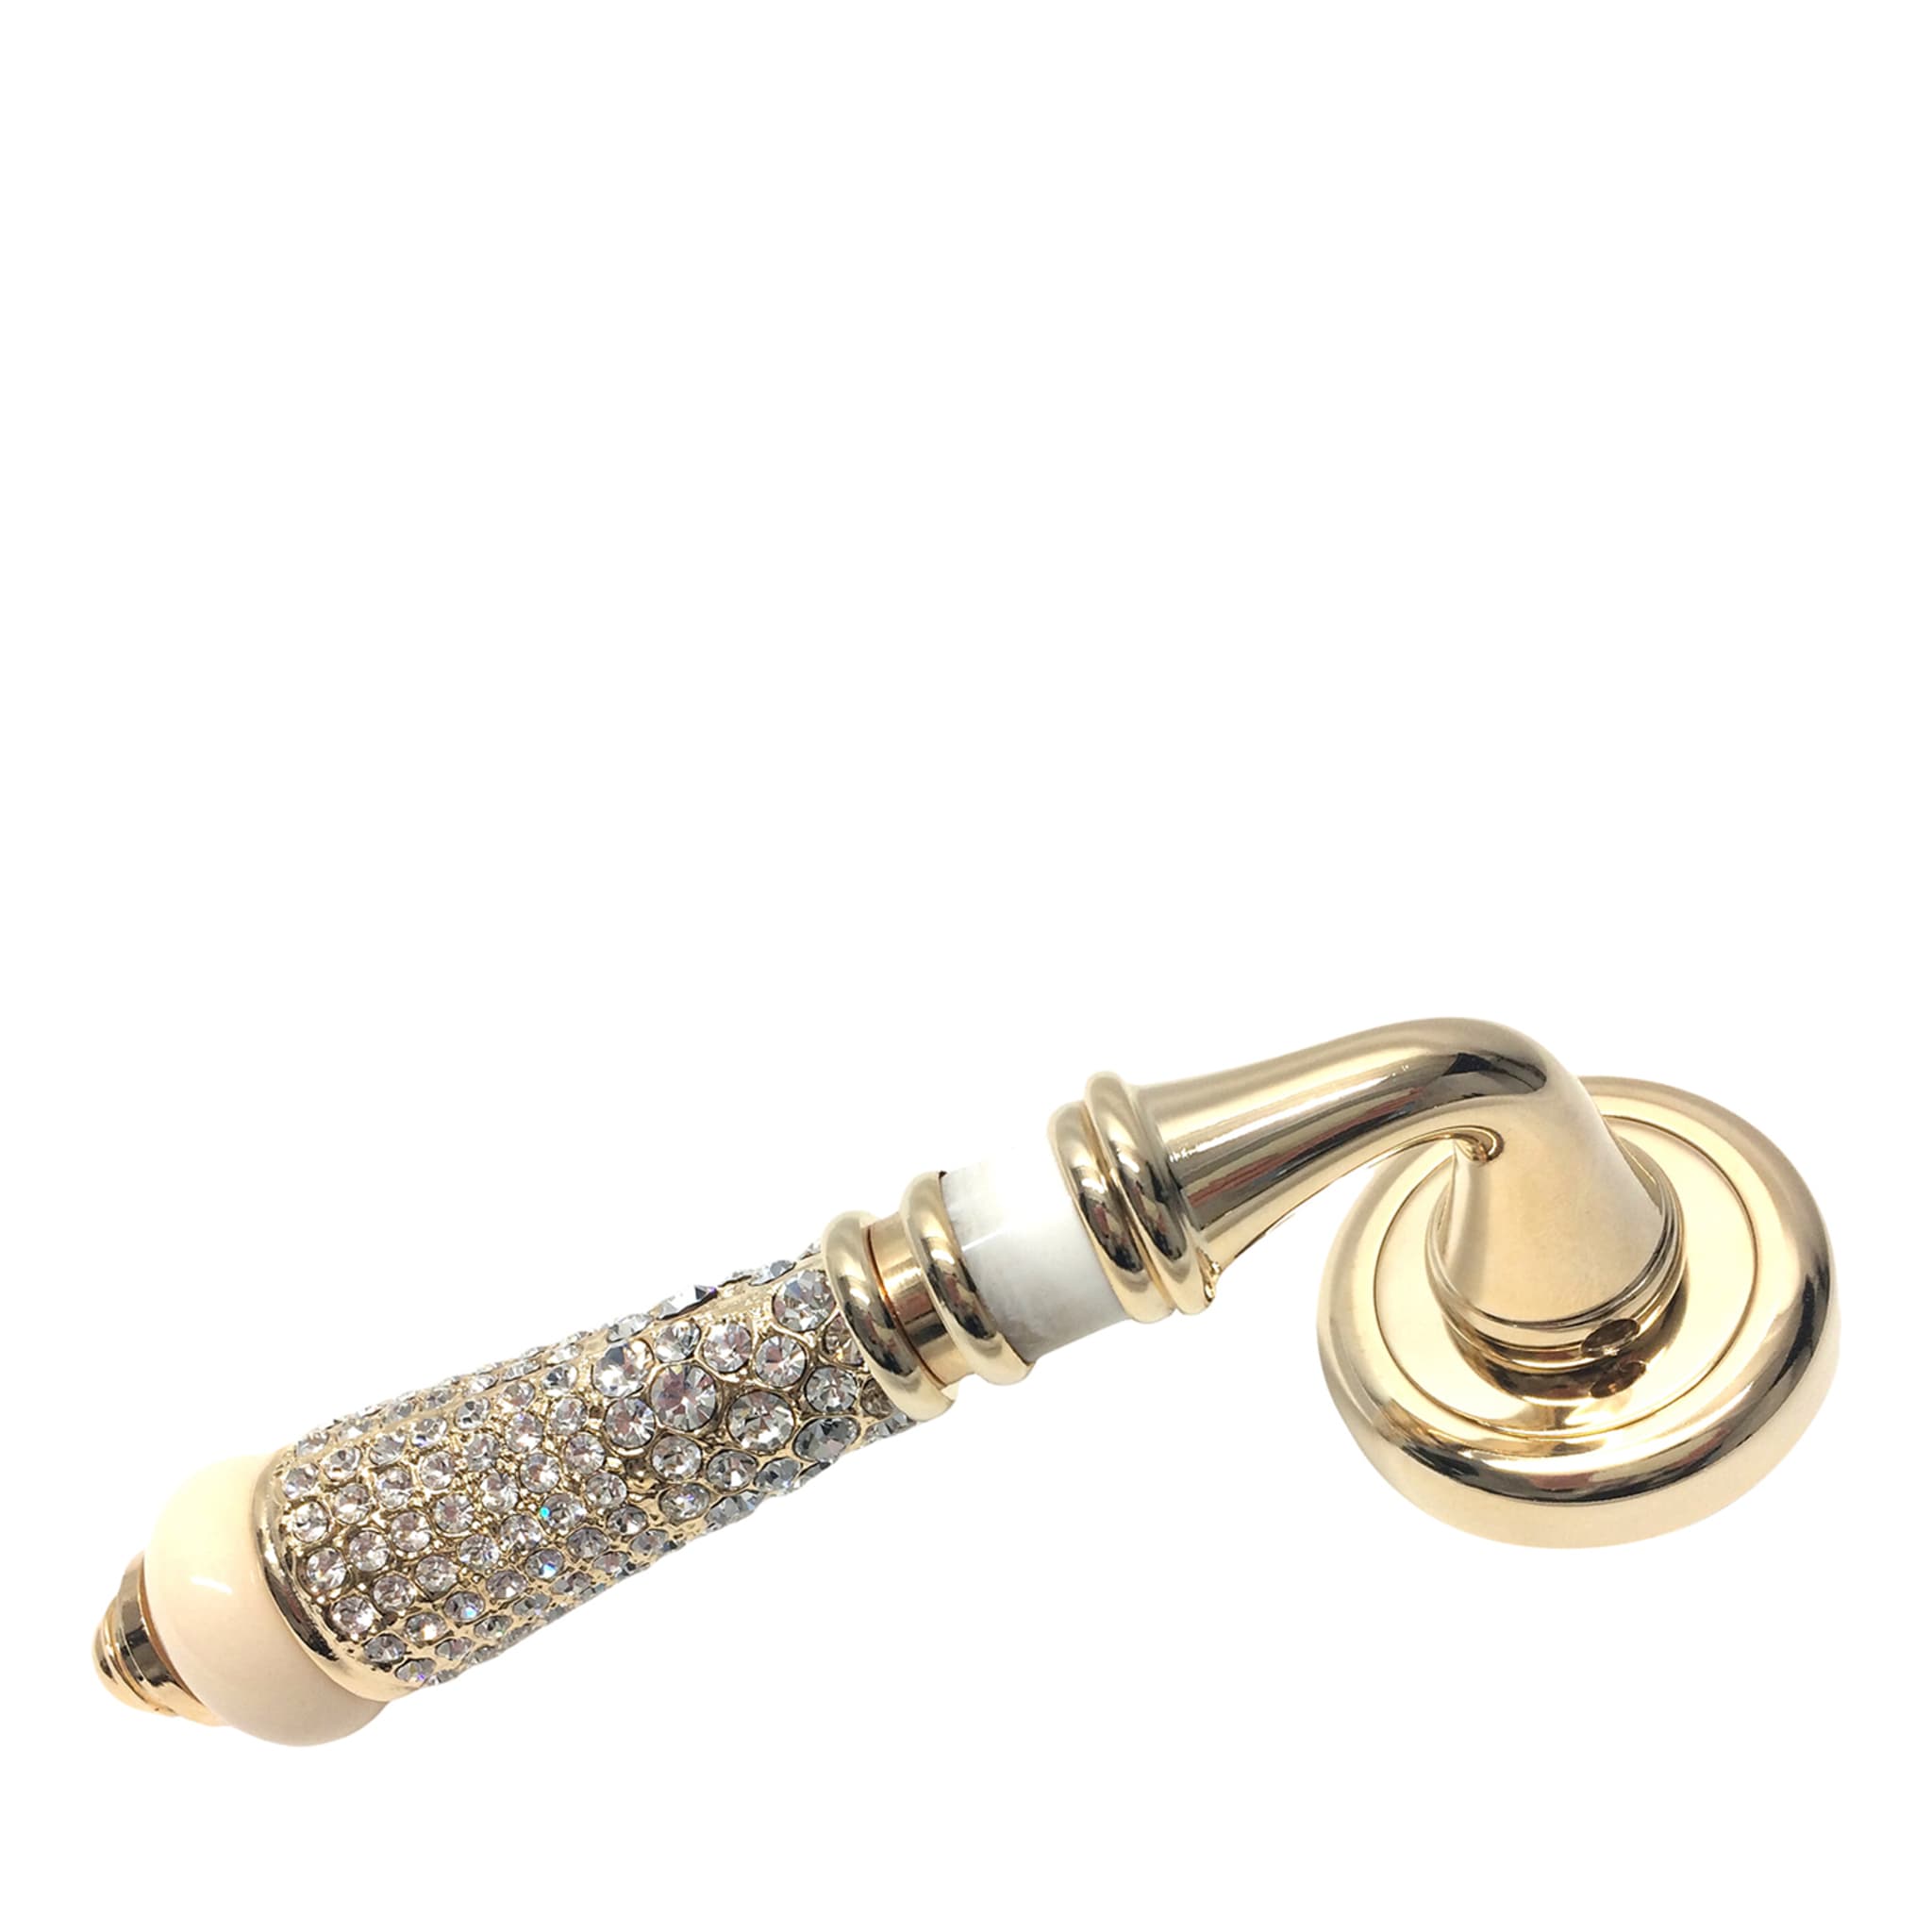 Golden Lever On Rose Handle with Rhinestones & White Inserts - Main view